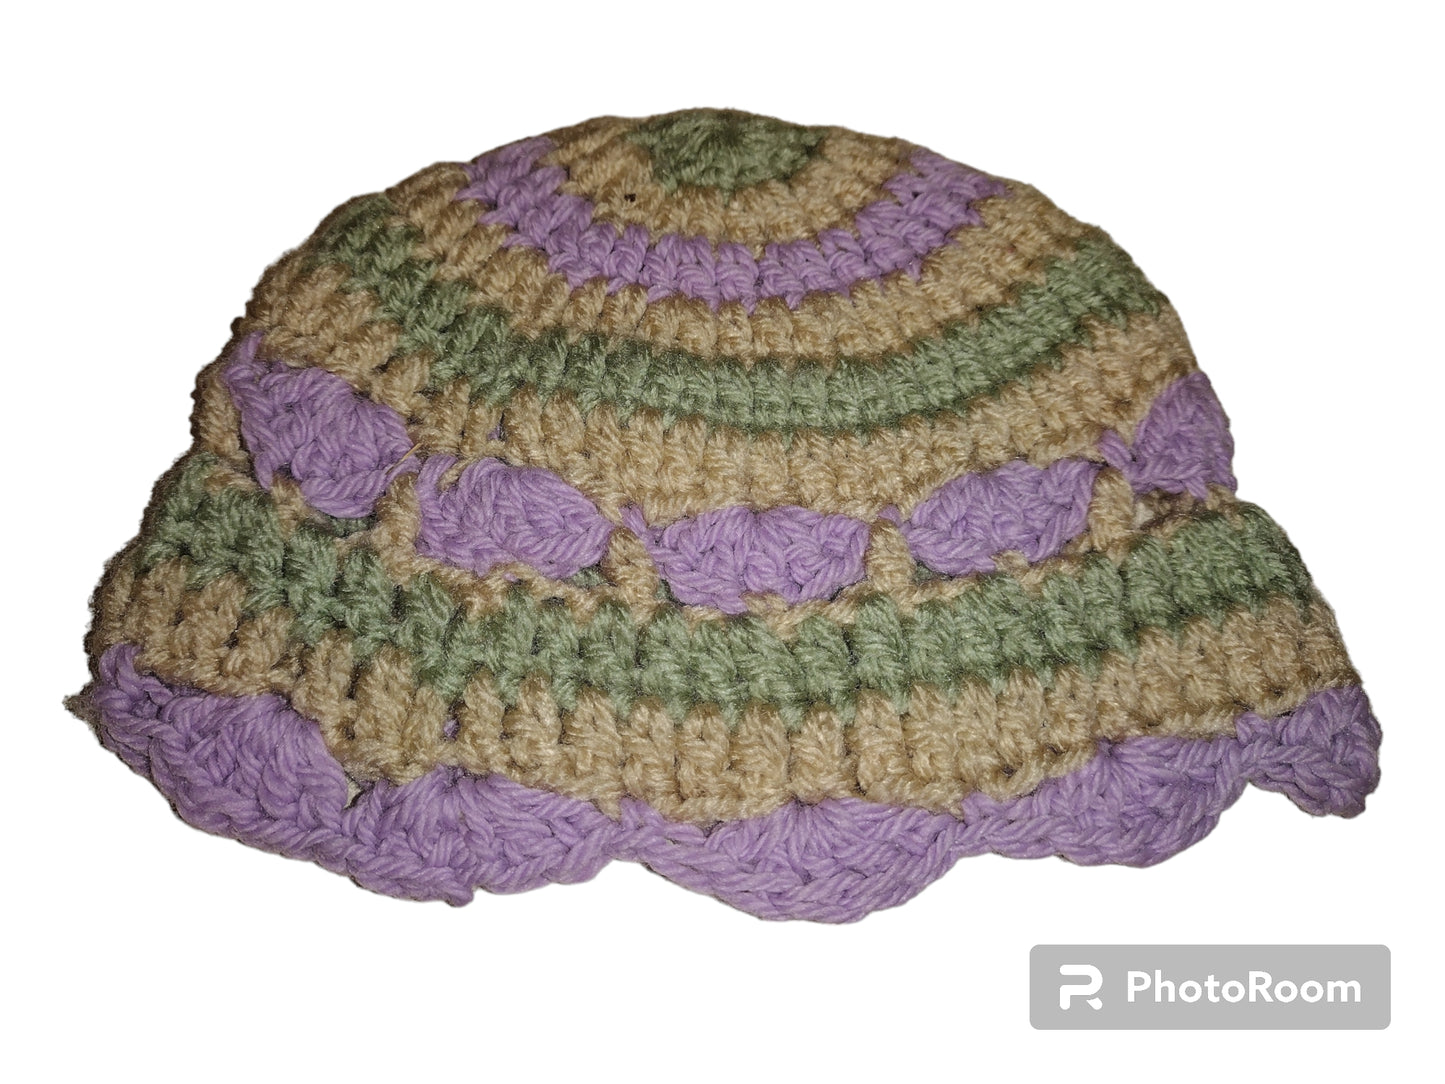 Scalloped baby hat